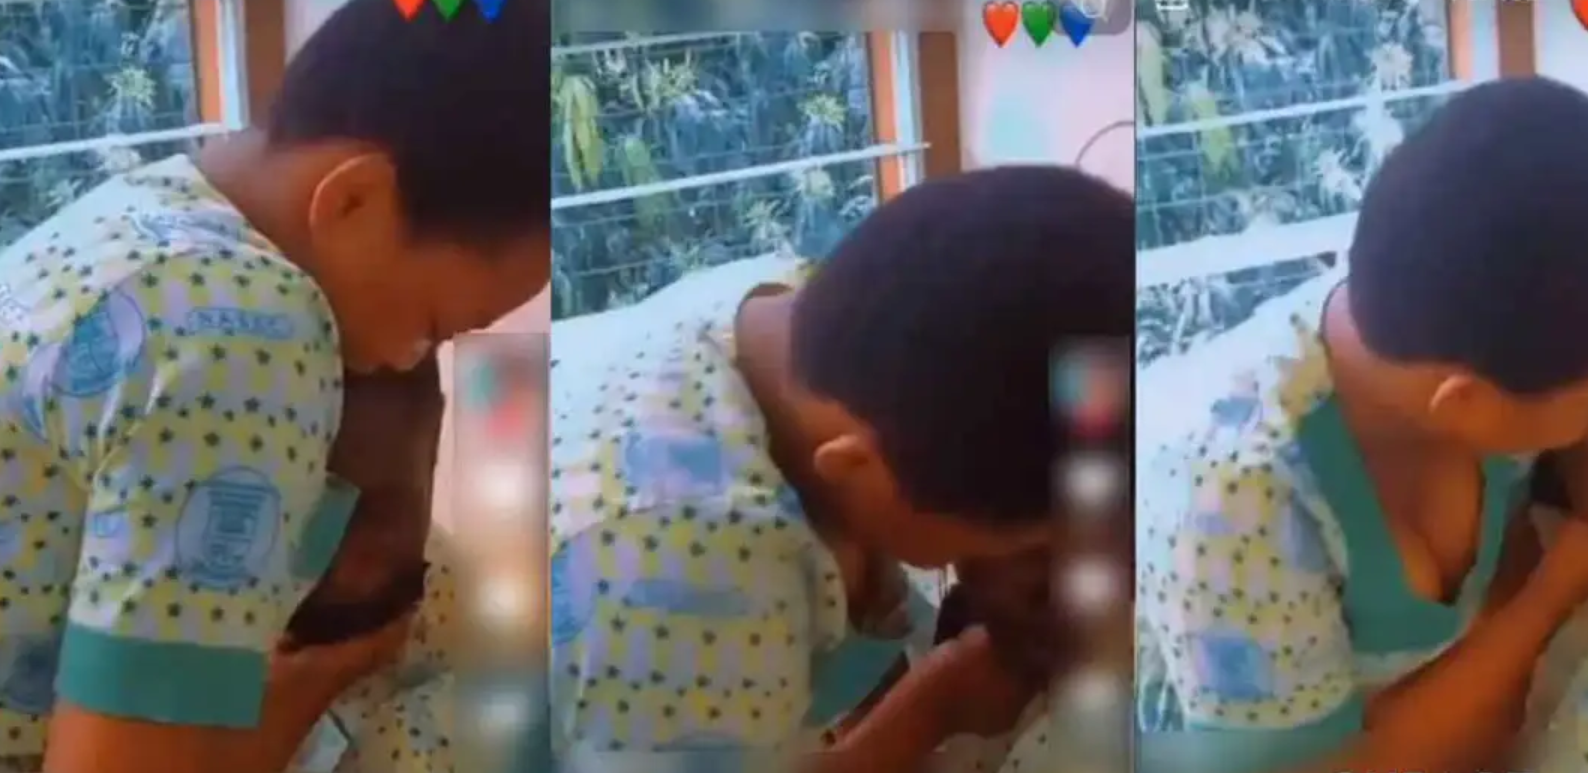 Female secondary school student forces male classmate to kiss her on school premises [VIDEO]